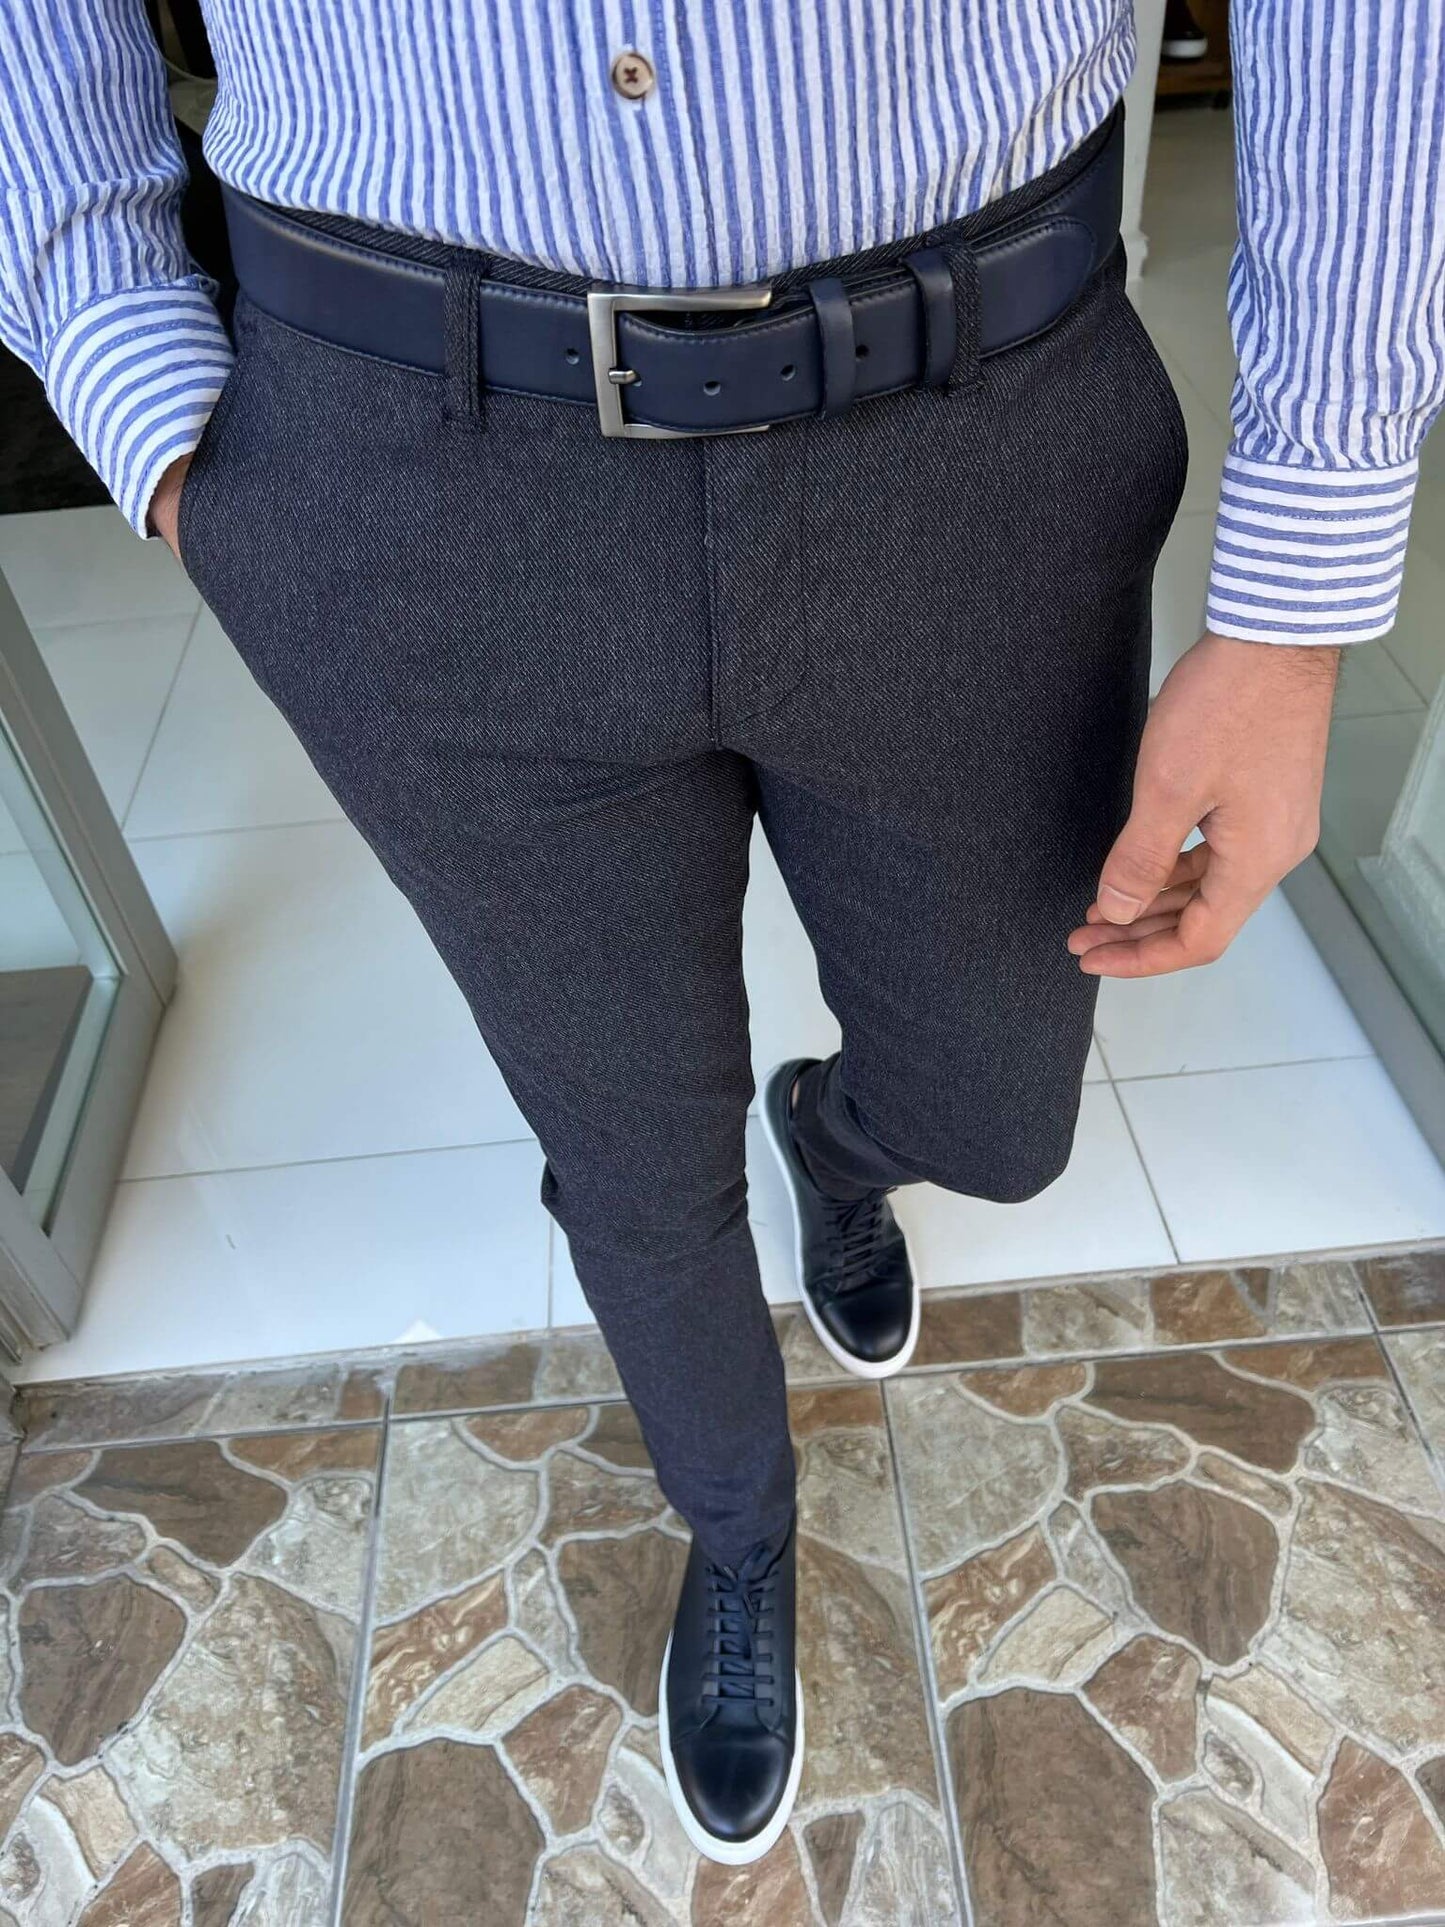 Navy blue pants tailored with a slim fit, delivering a sharp and tailored appearance